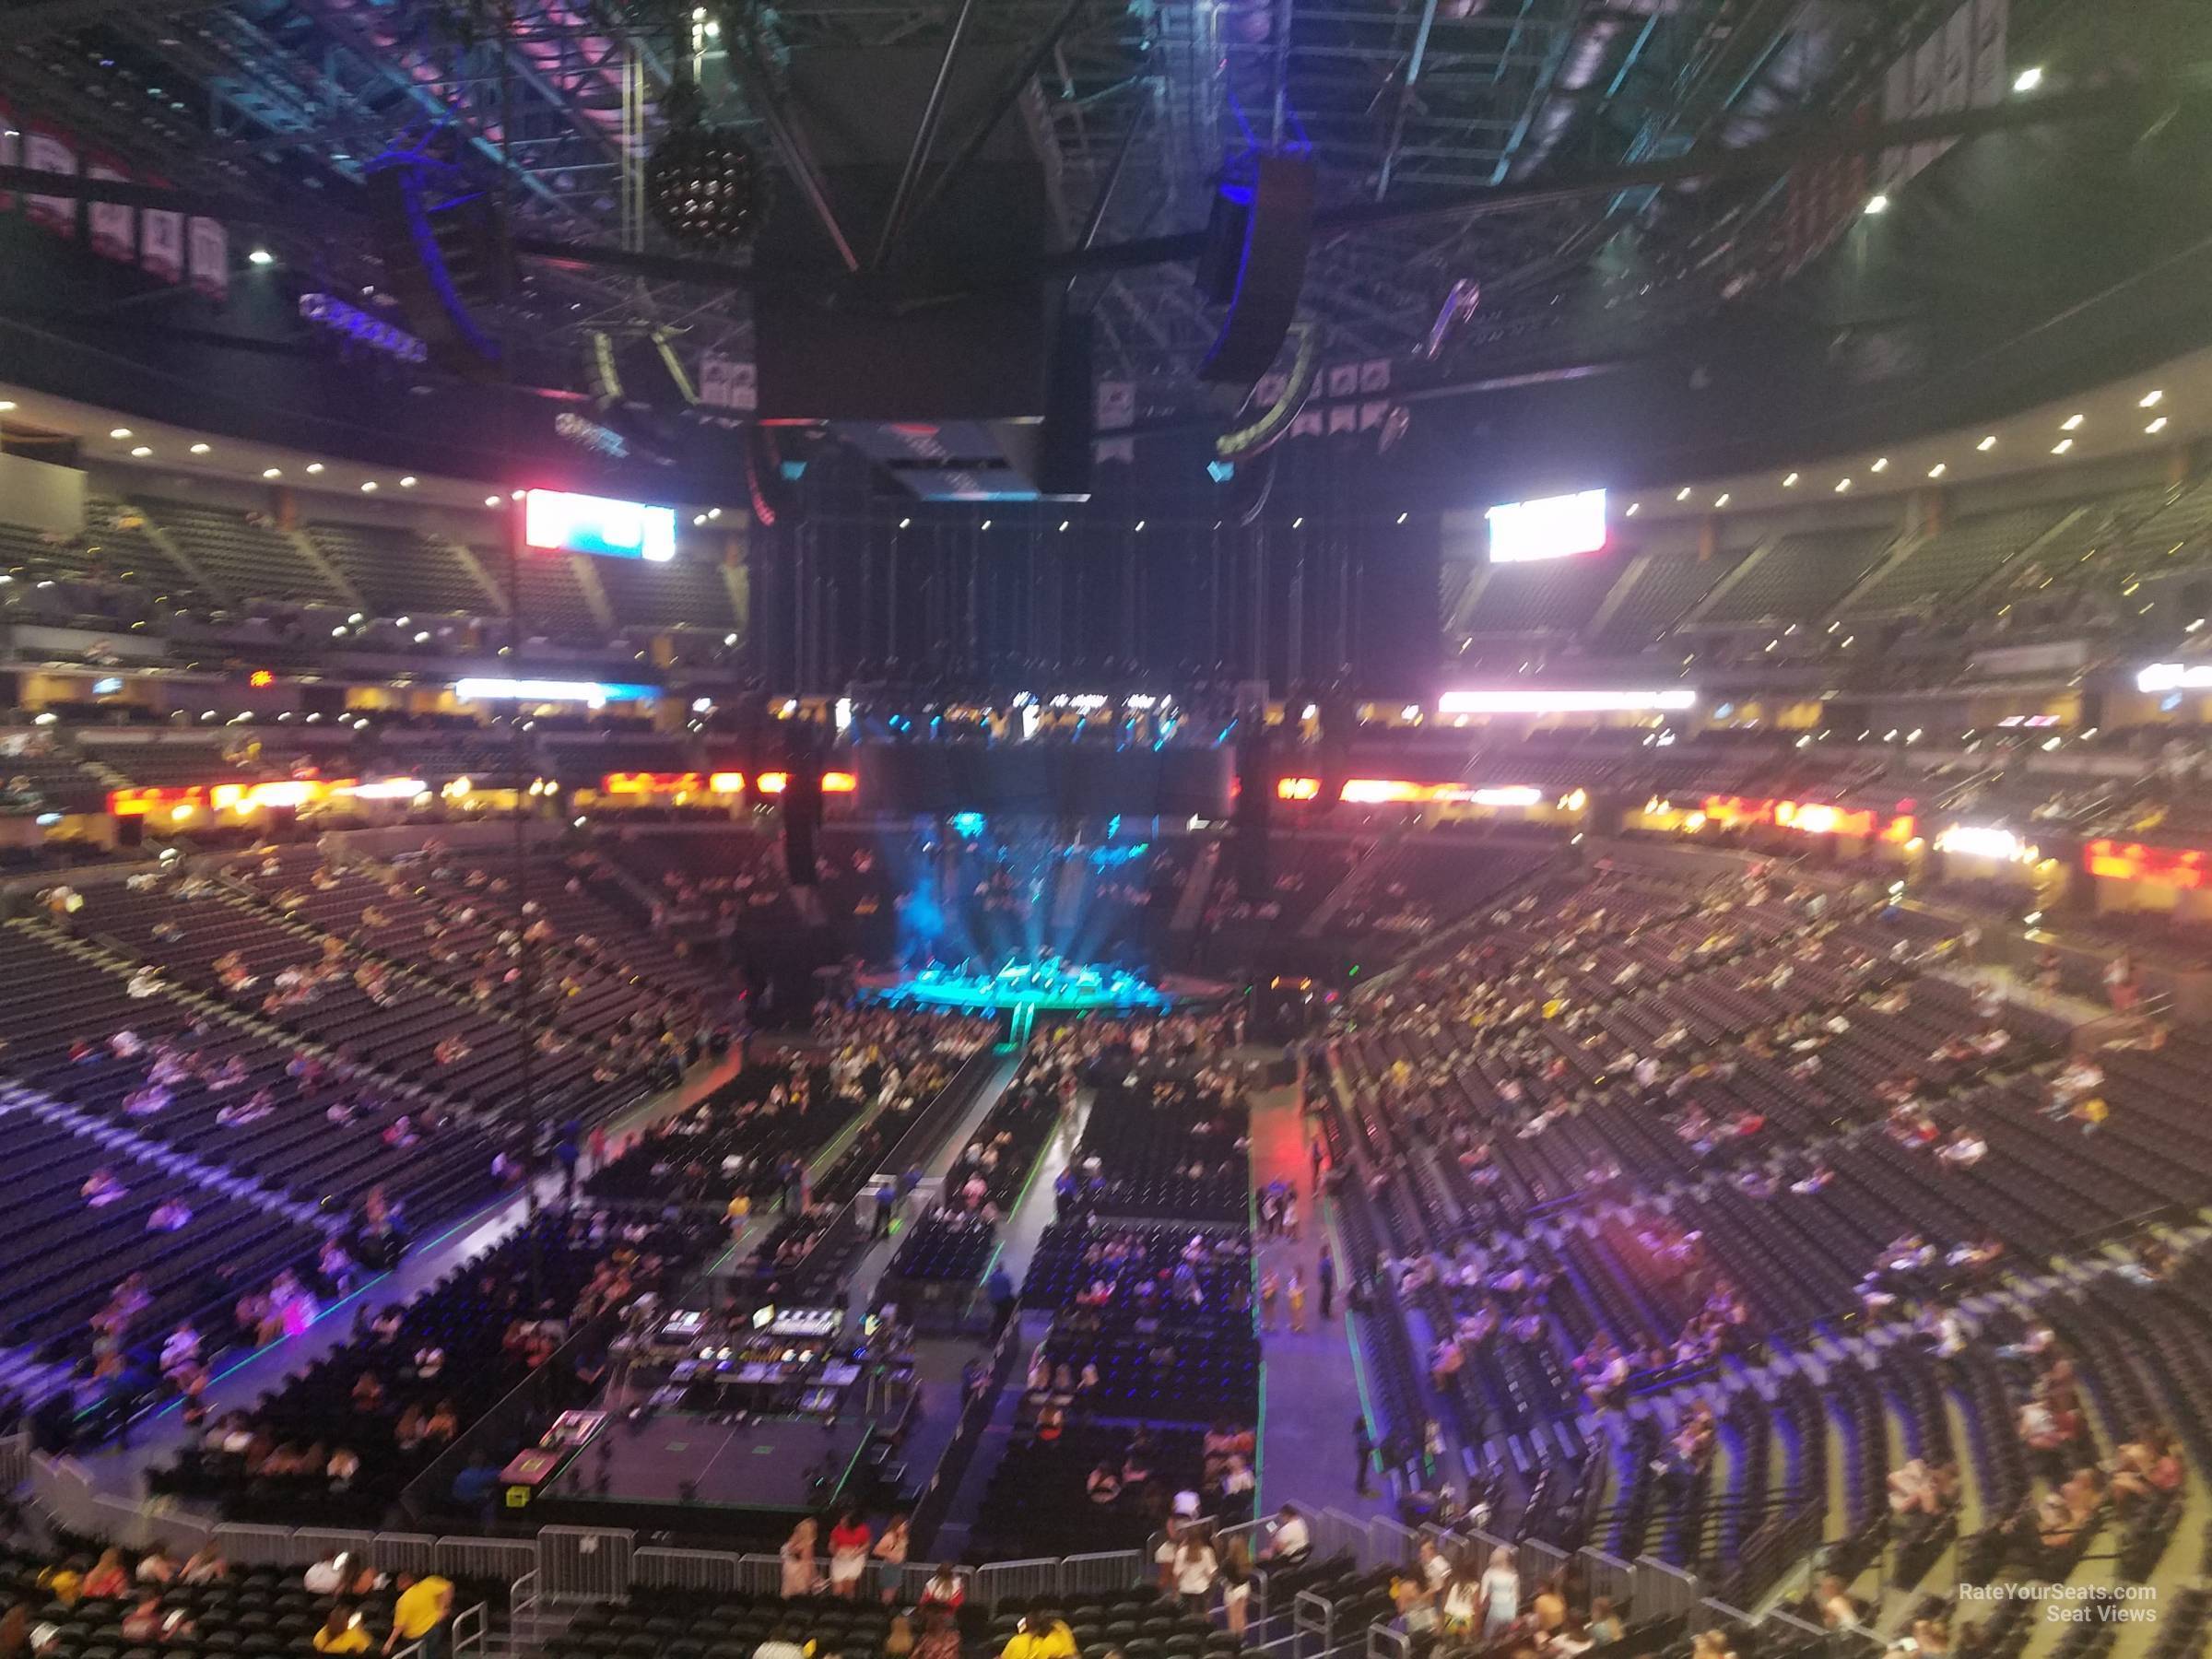 Section 214 at Pepsi Center for Concerts